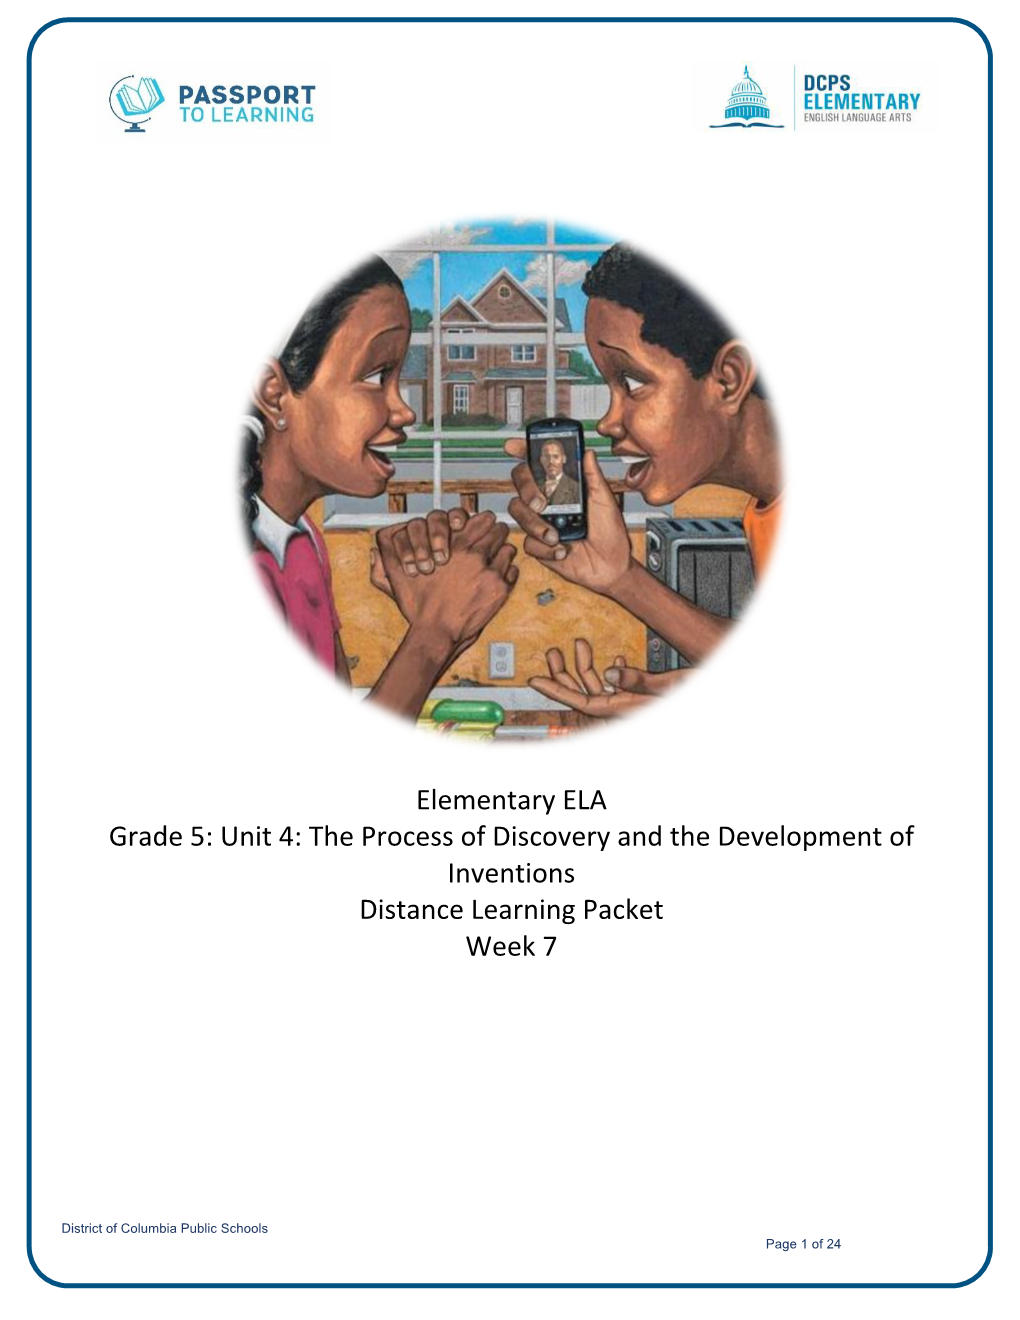 Elementary ELA Grade 5: Unit 4: the Process of Discovery and the Development of Inventions Distance Learning Packet Week 7